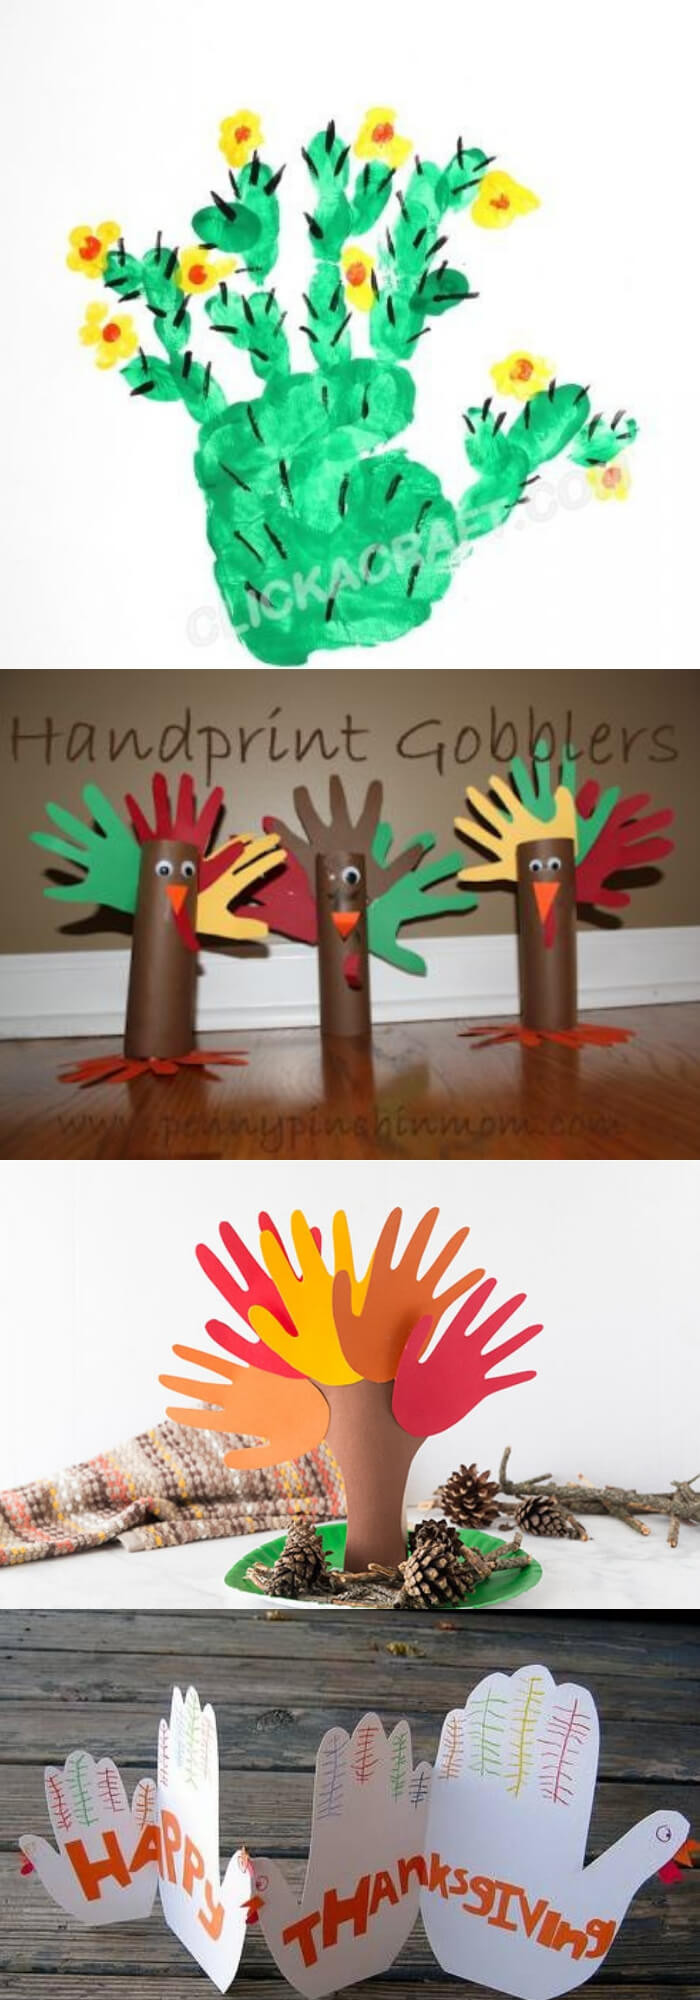 Thanksgiving Gifts For Children
 9 Awesome Thanksgiving Gifts Kids Can Make FarmFoodFamily